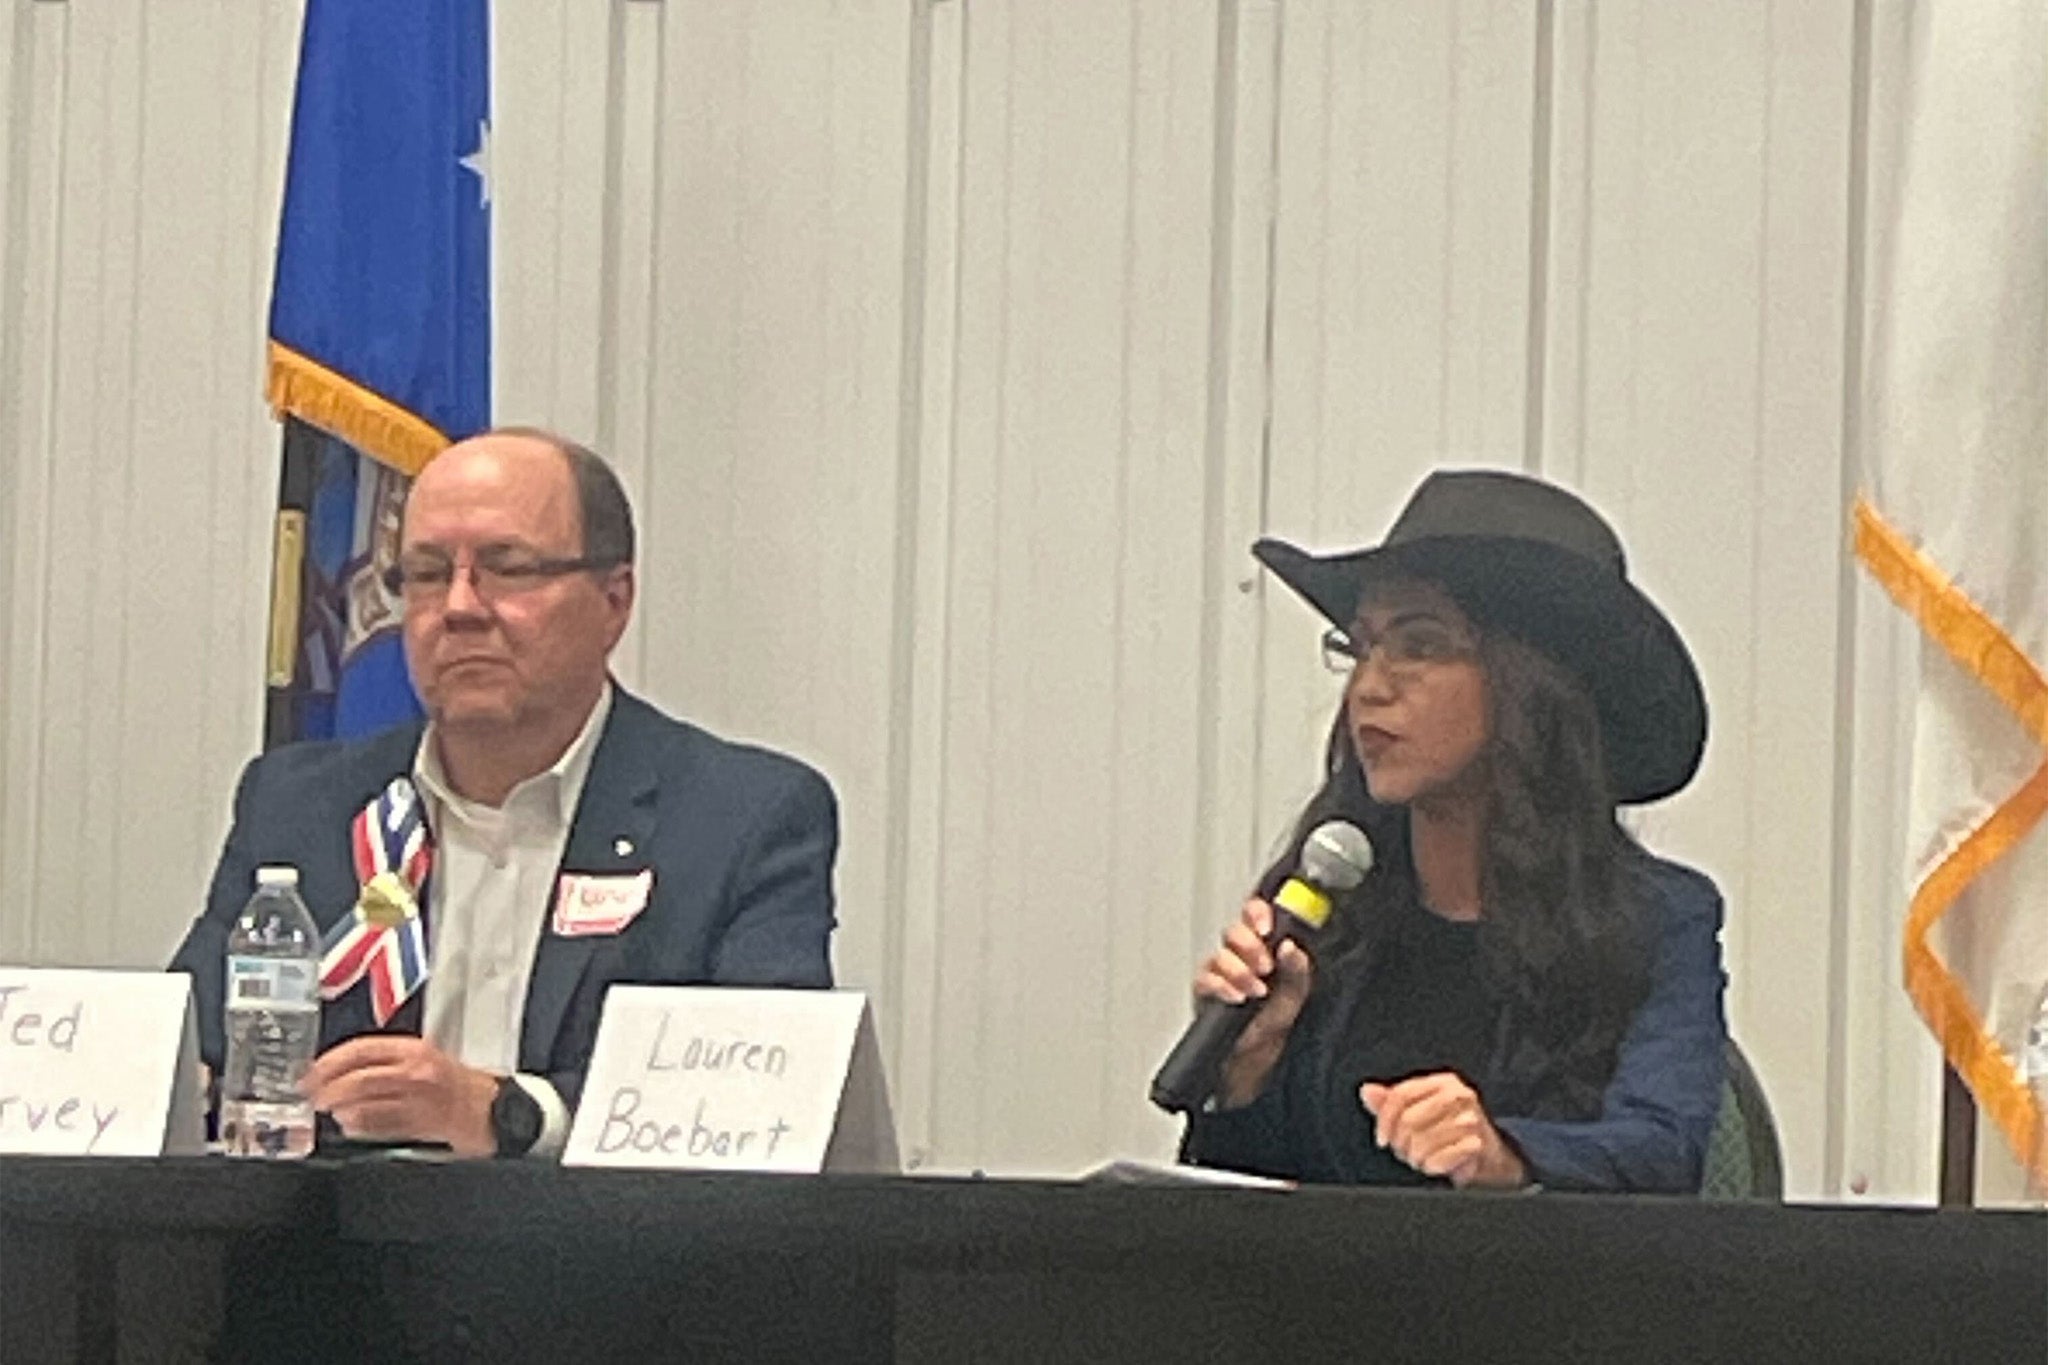 Rep. Lauren Boebert, who represents Colorado’s Third congressional district, is now vying for a seat across the state in CD4 -- where she attended a candidate forum over the weekend and sat behind a misspelt name card at the dais